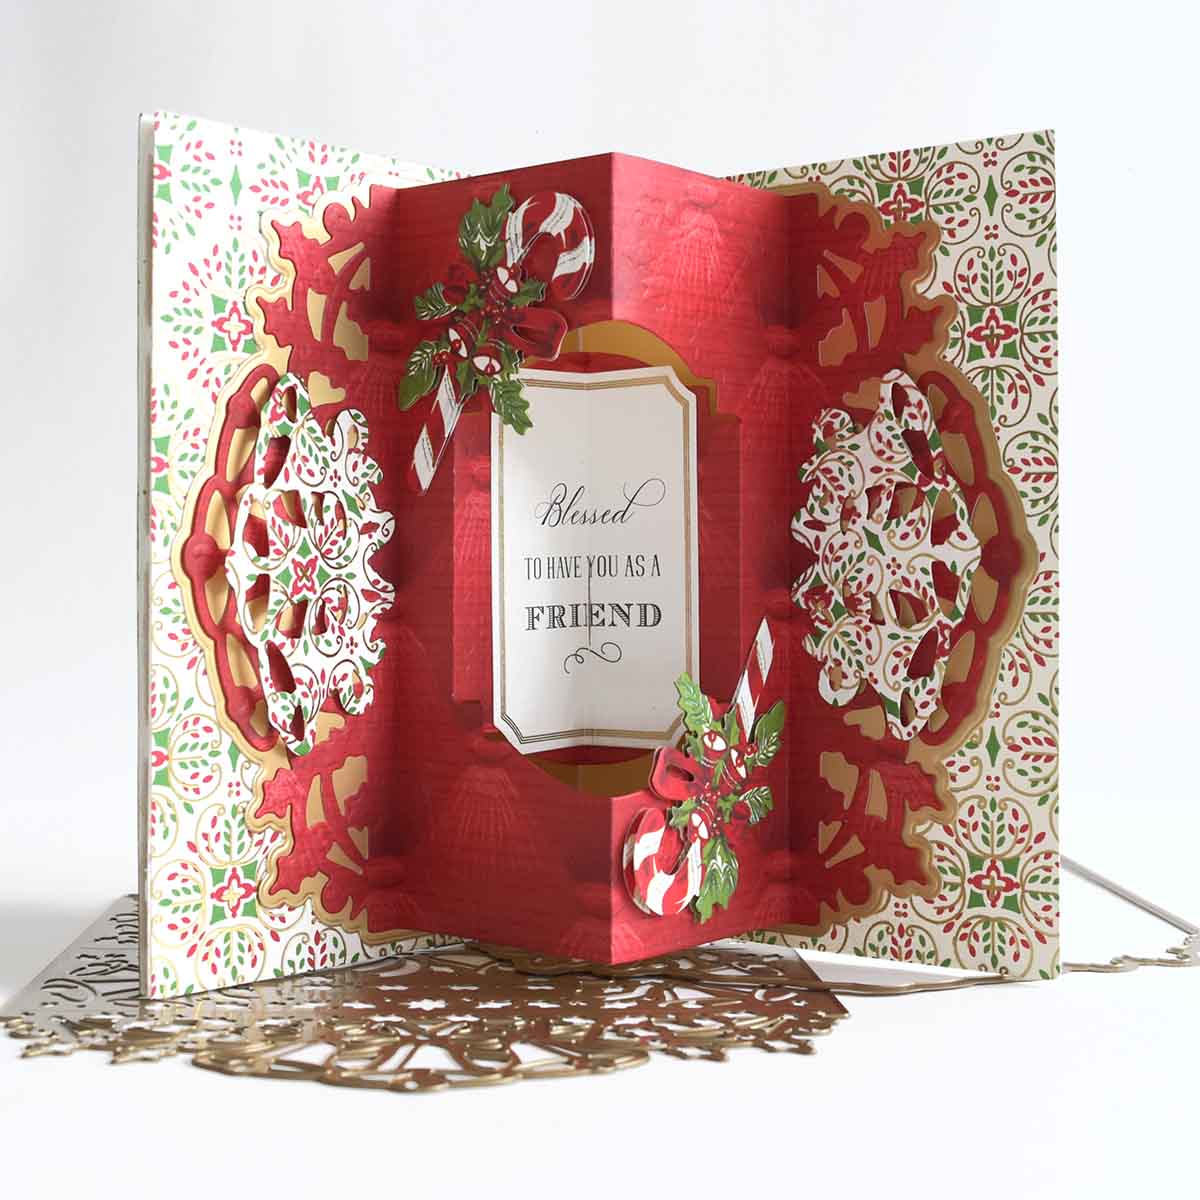 a red and white card with snowflakes on it.